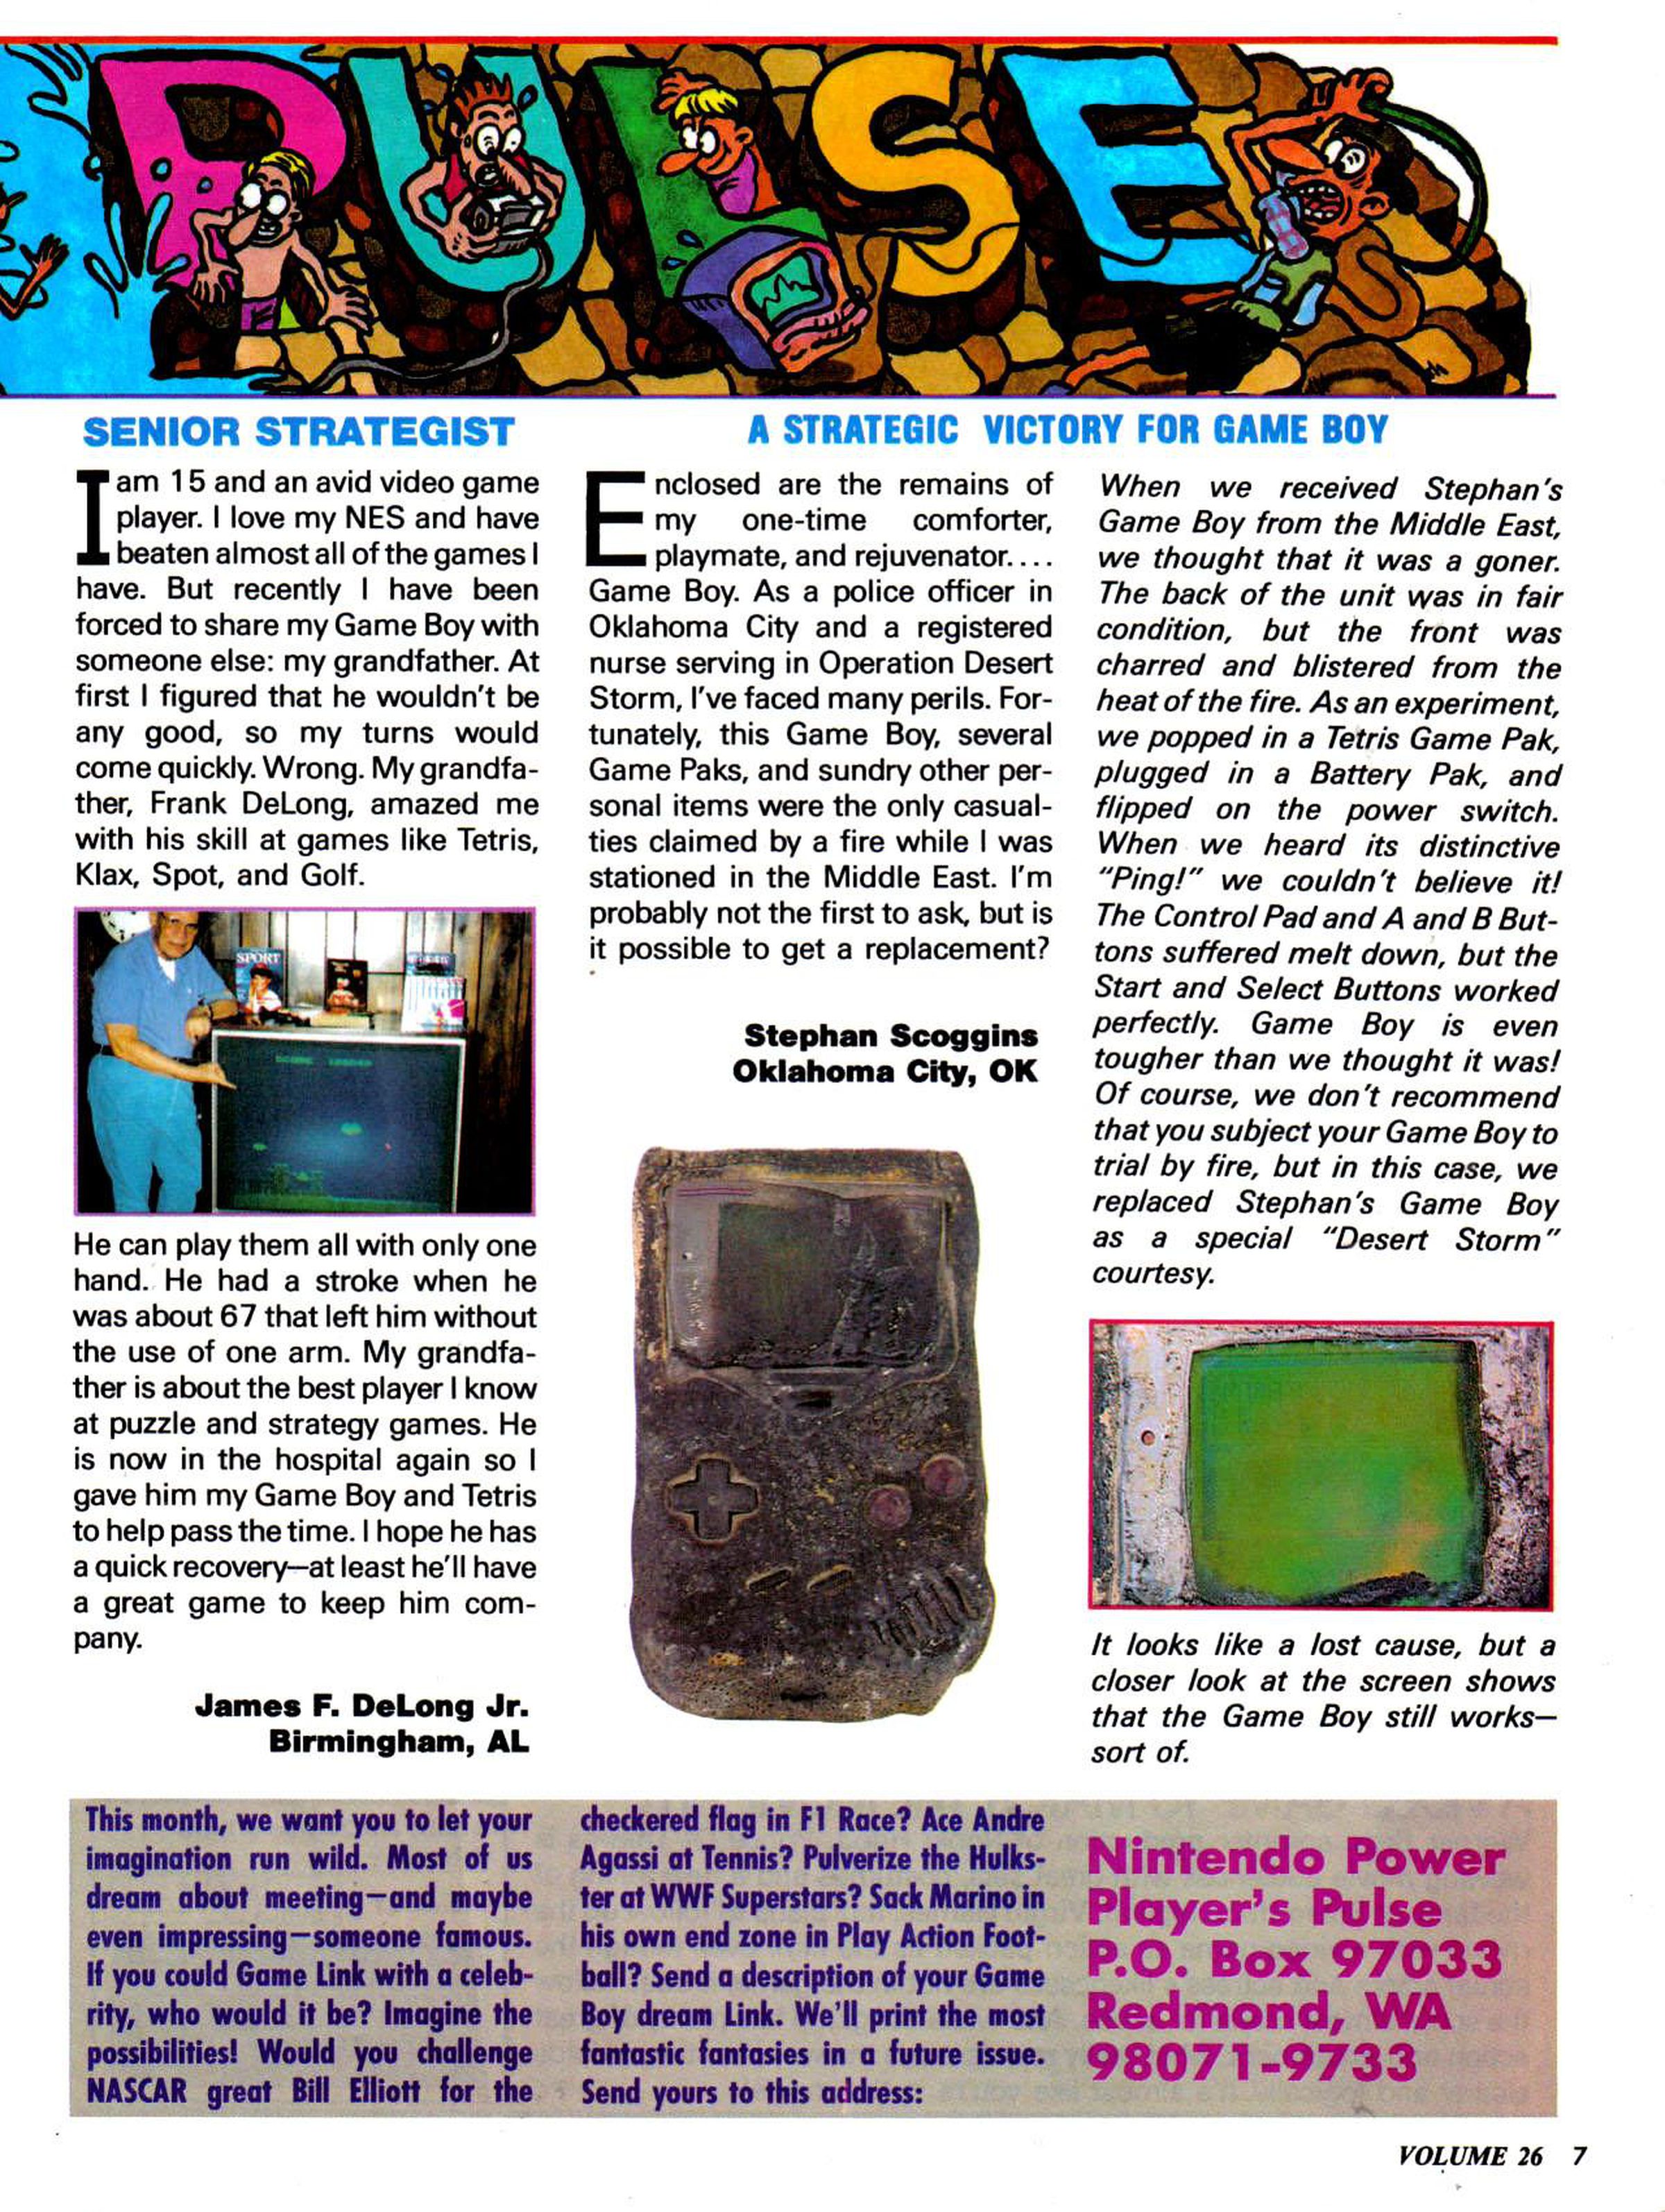 The Nintendo Power origin story, found at this link.